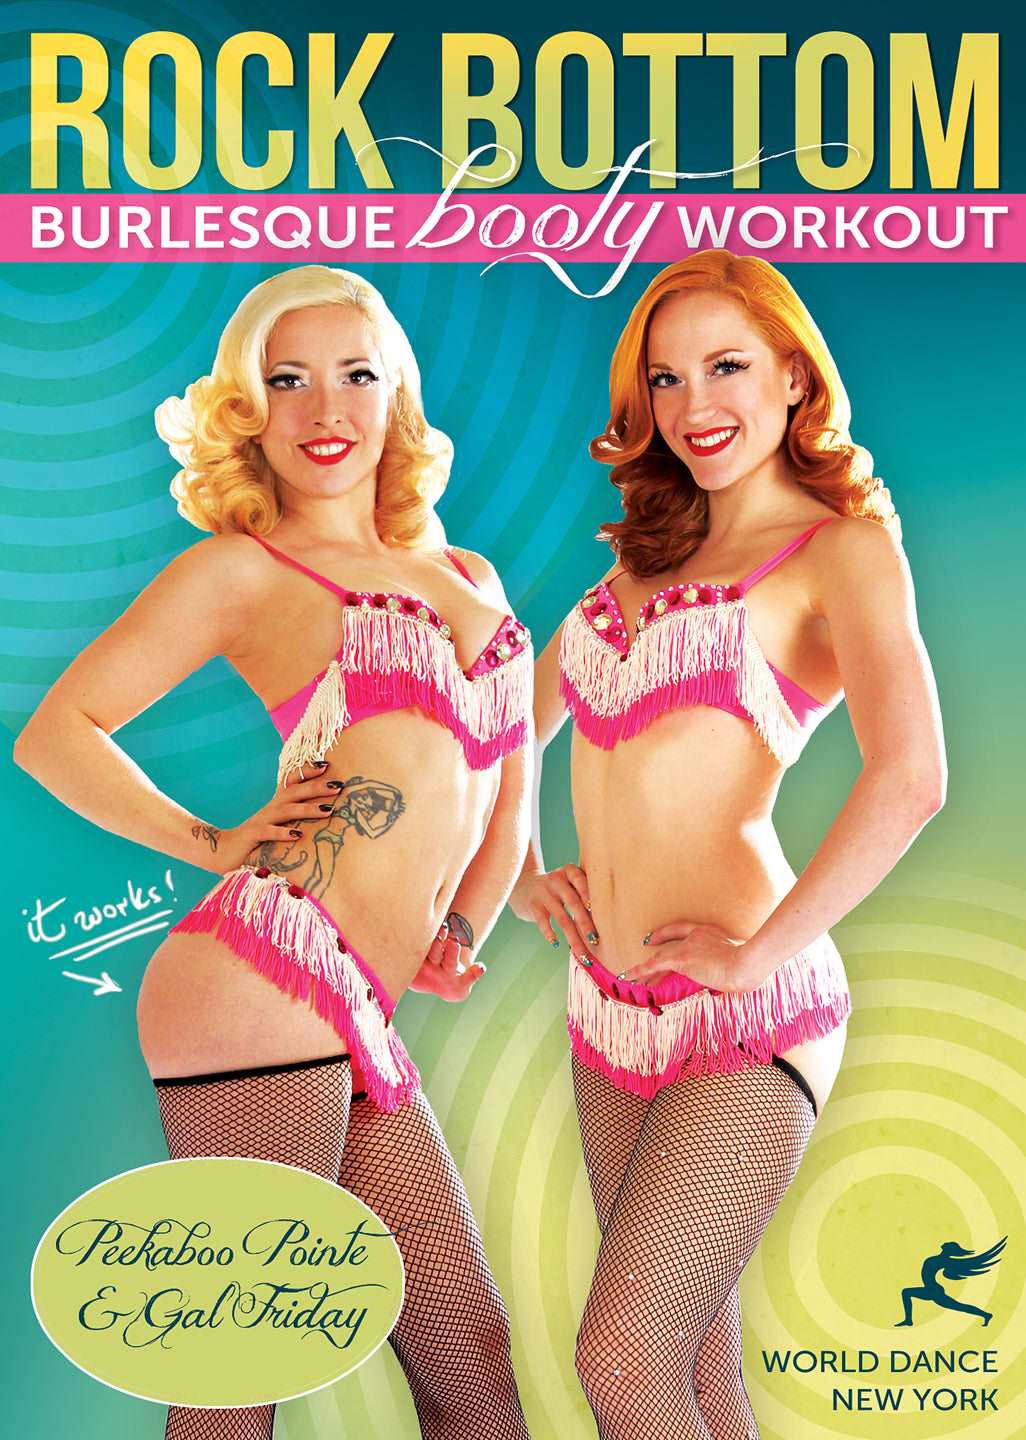 "Rock Bottom: The Burlesque Booty Workout" DVD with Peekaboo Pointe, Gal Friday - World Dance New York